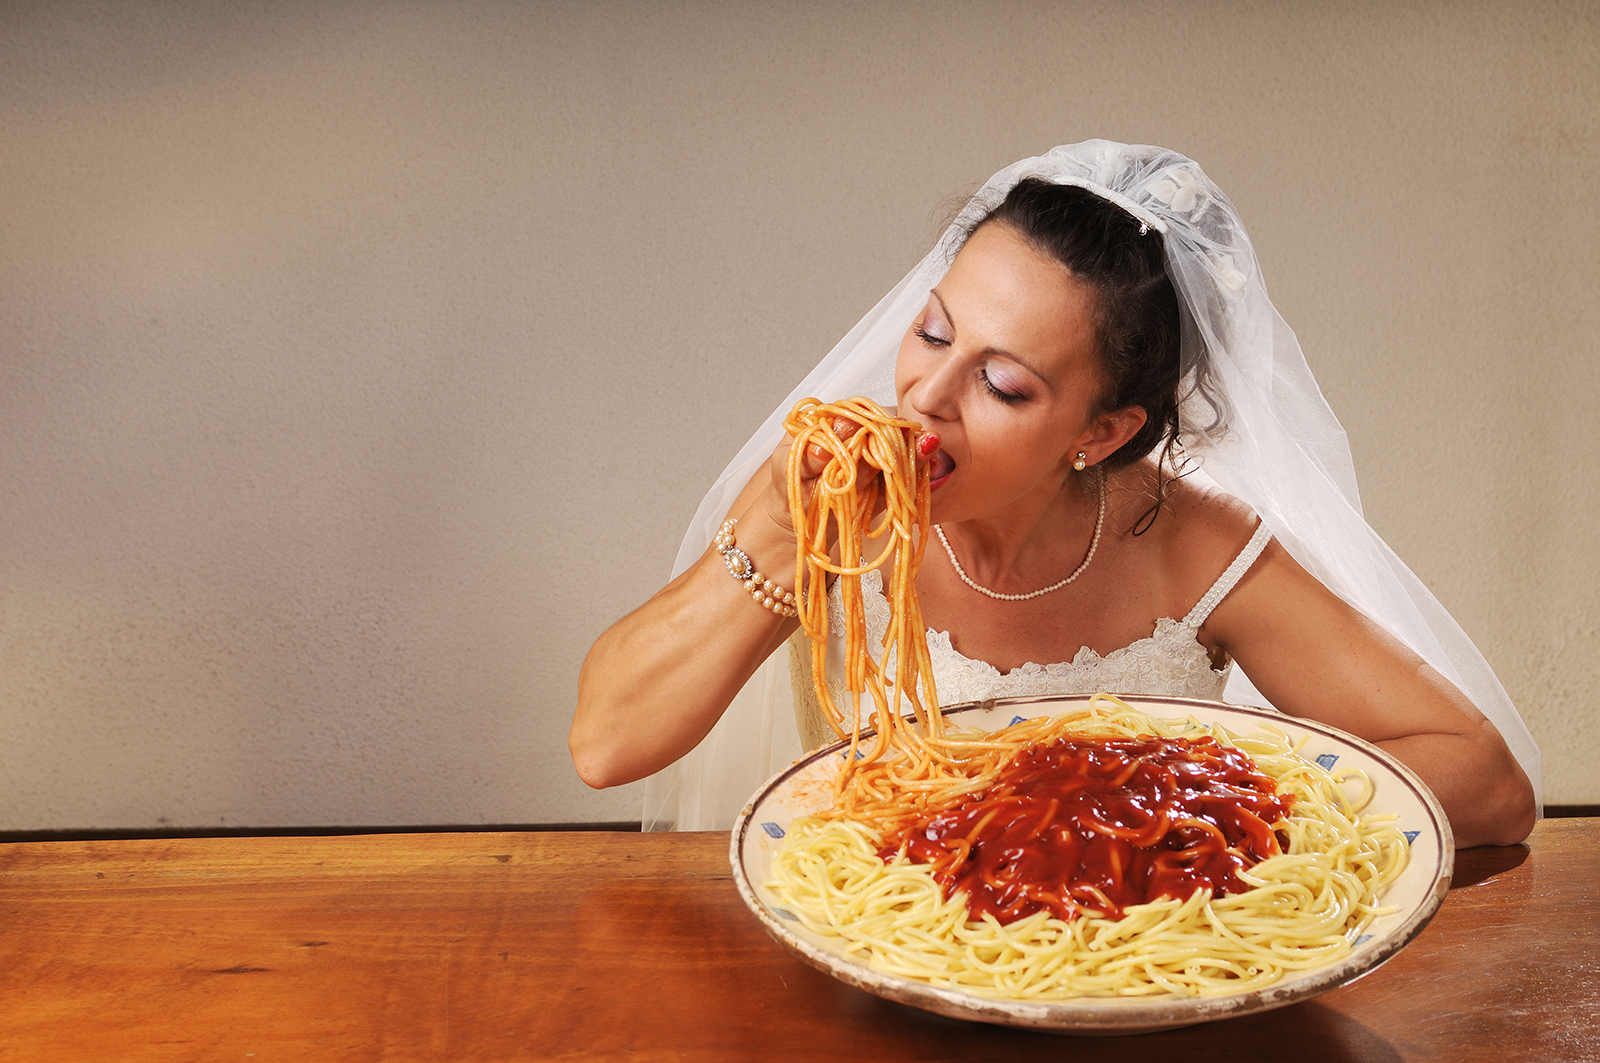 young bride eats spaghetti with tomato in rustic setting